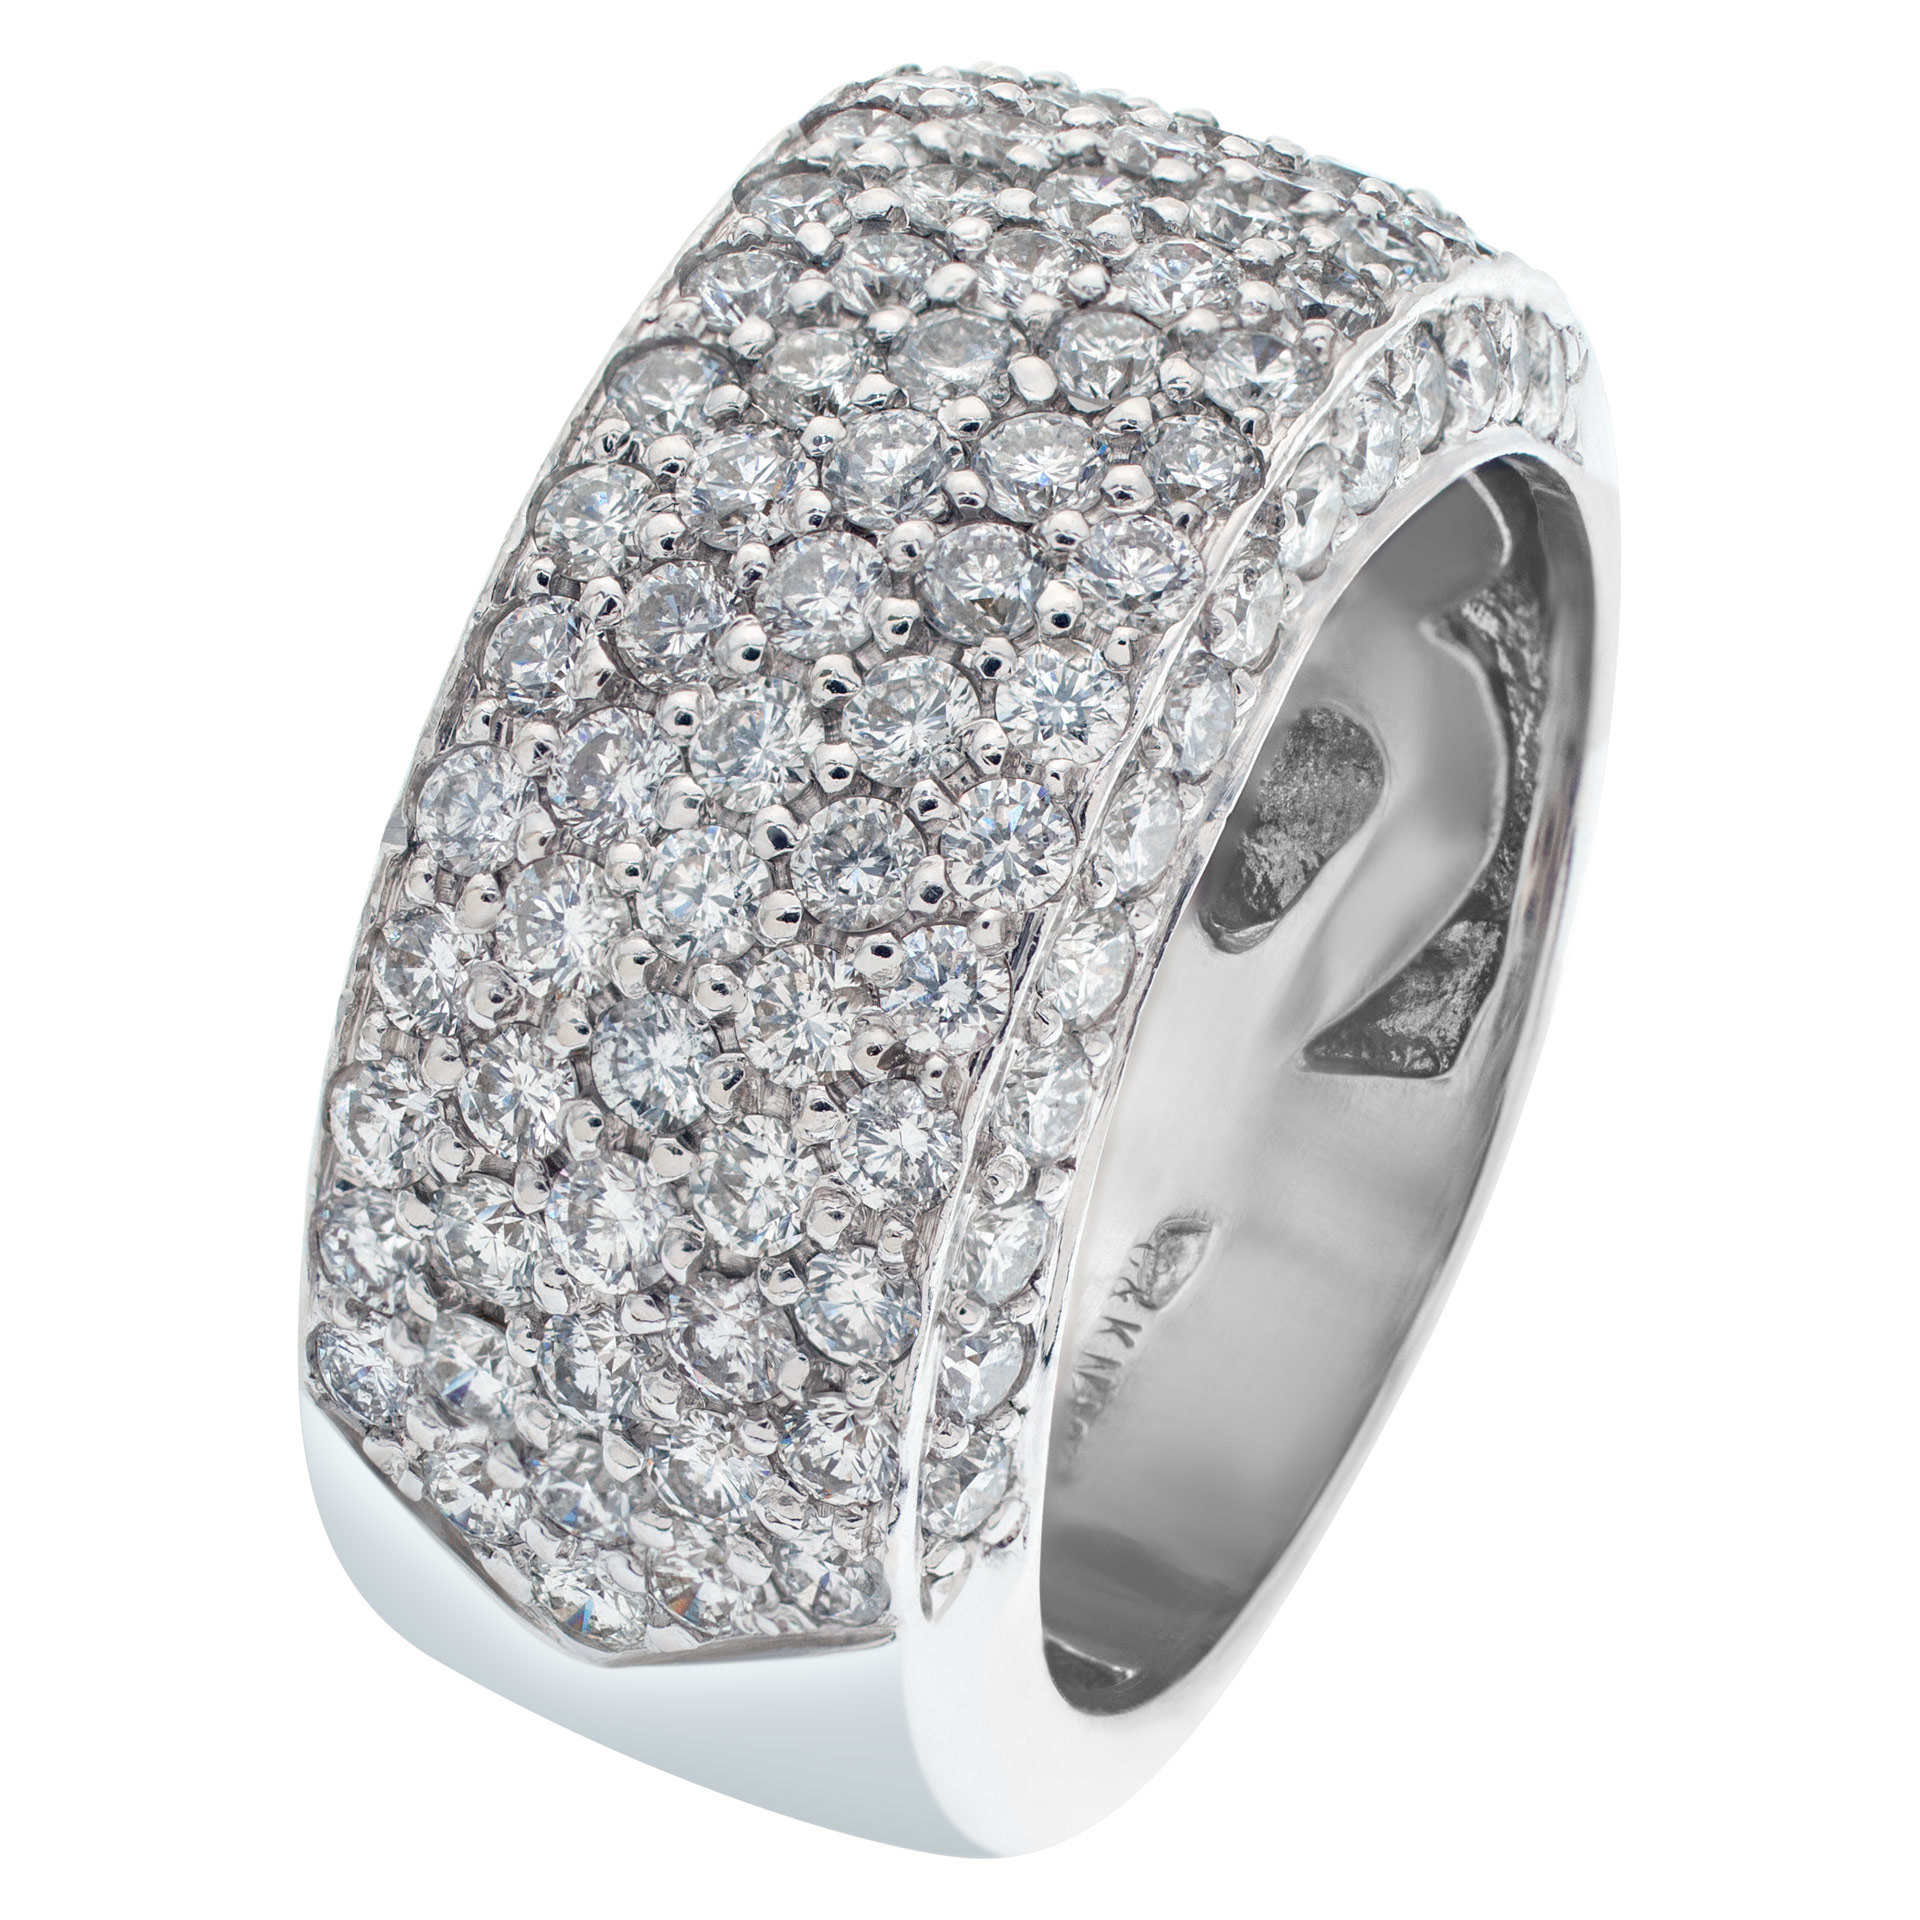 Sparkling bright micro pave diamond ring set in 18k white gold image 2